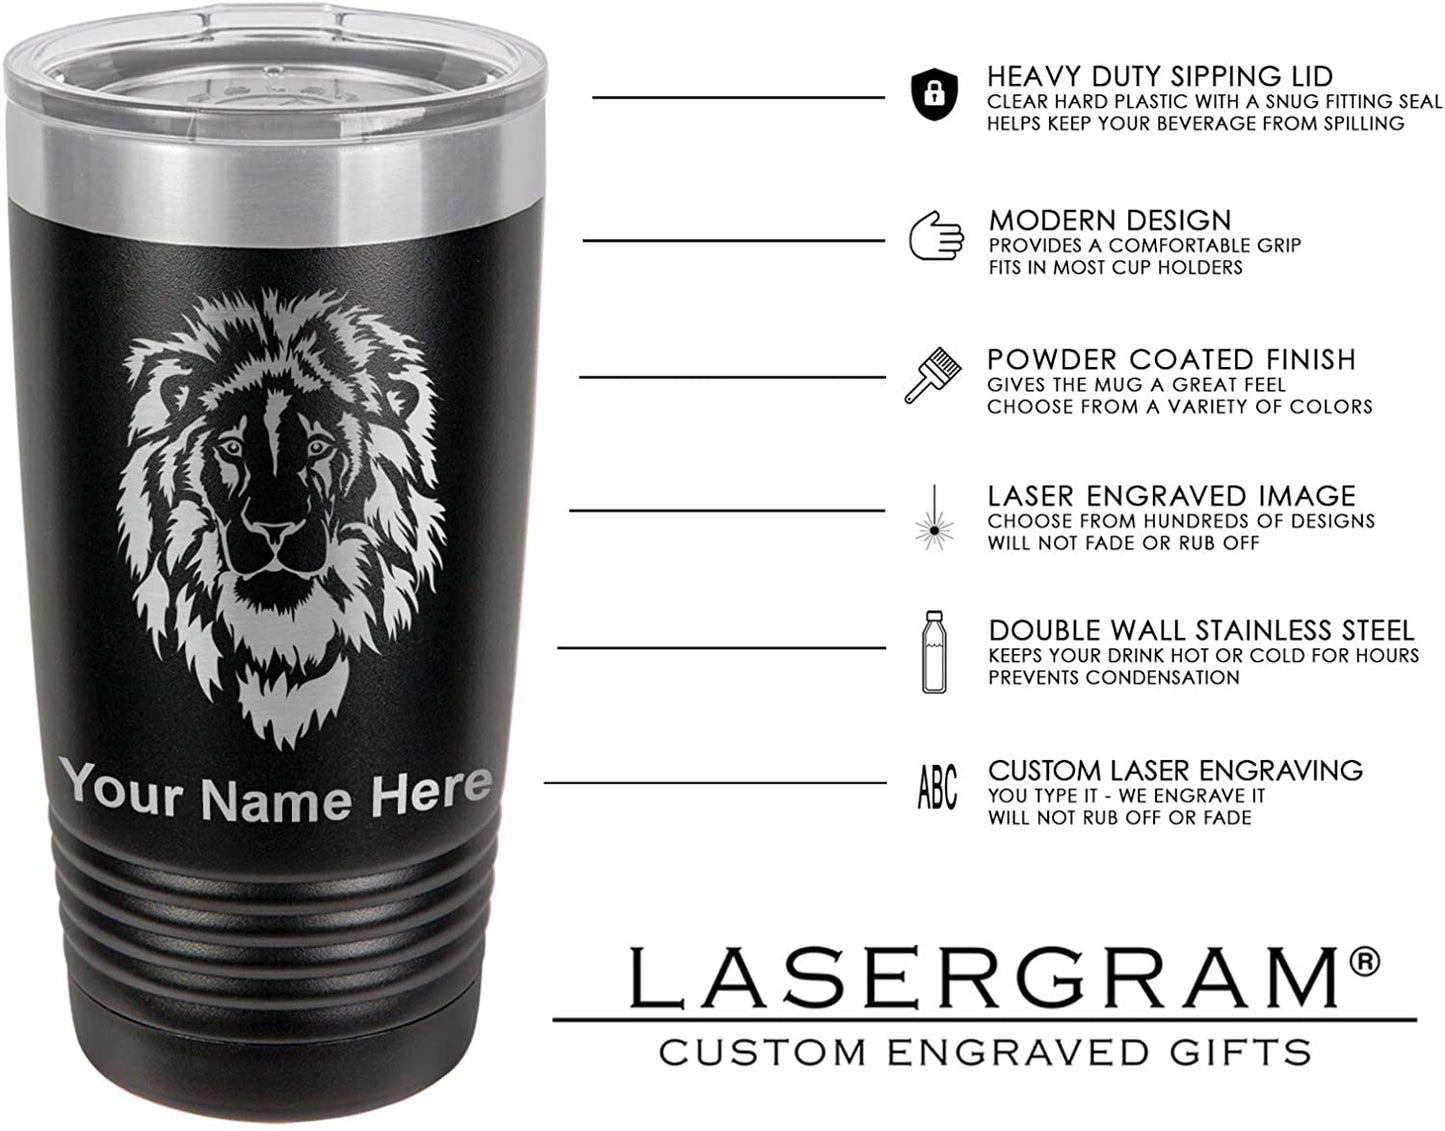 20oz Vacuum Insulated Tumbler Mug, CNA Certified Nurse Assistant, Personalized Engraving Included